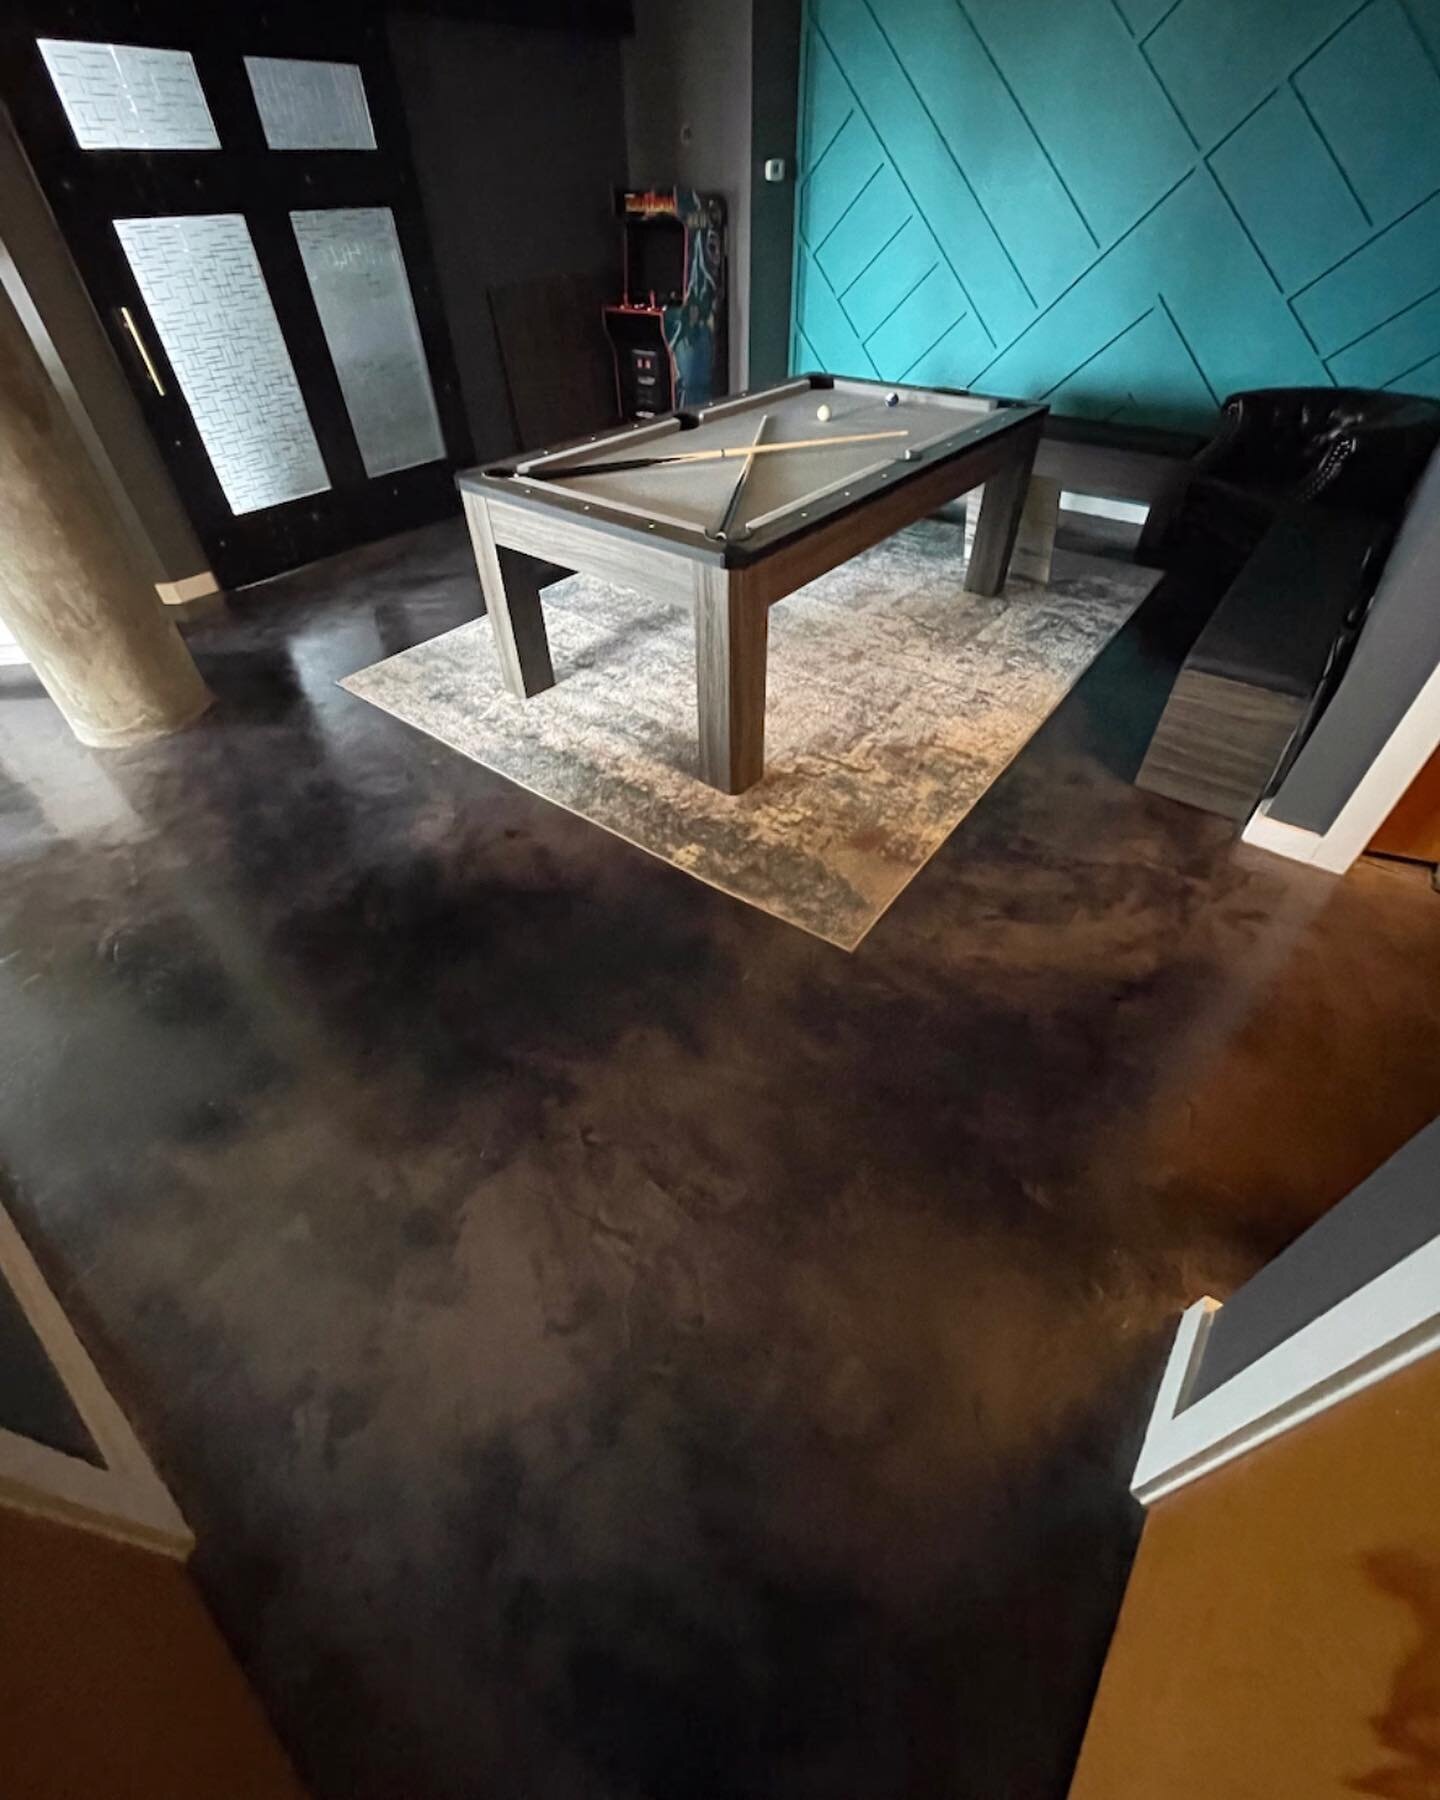 Stained concrete showcasing its minimalistic raw beauty while complementing this bold interior Atlanta loft.